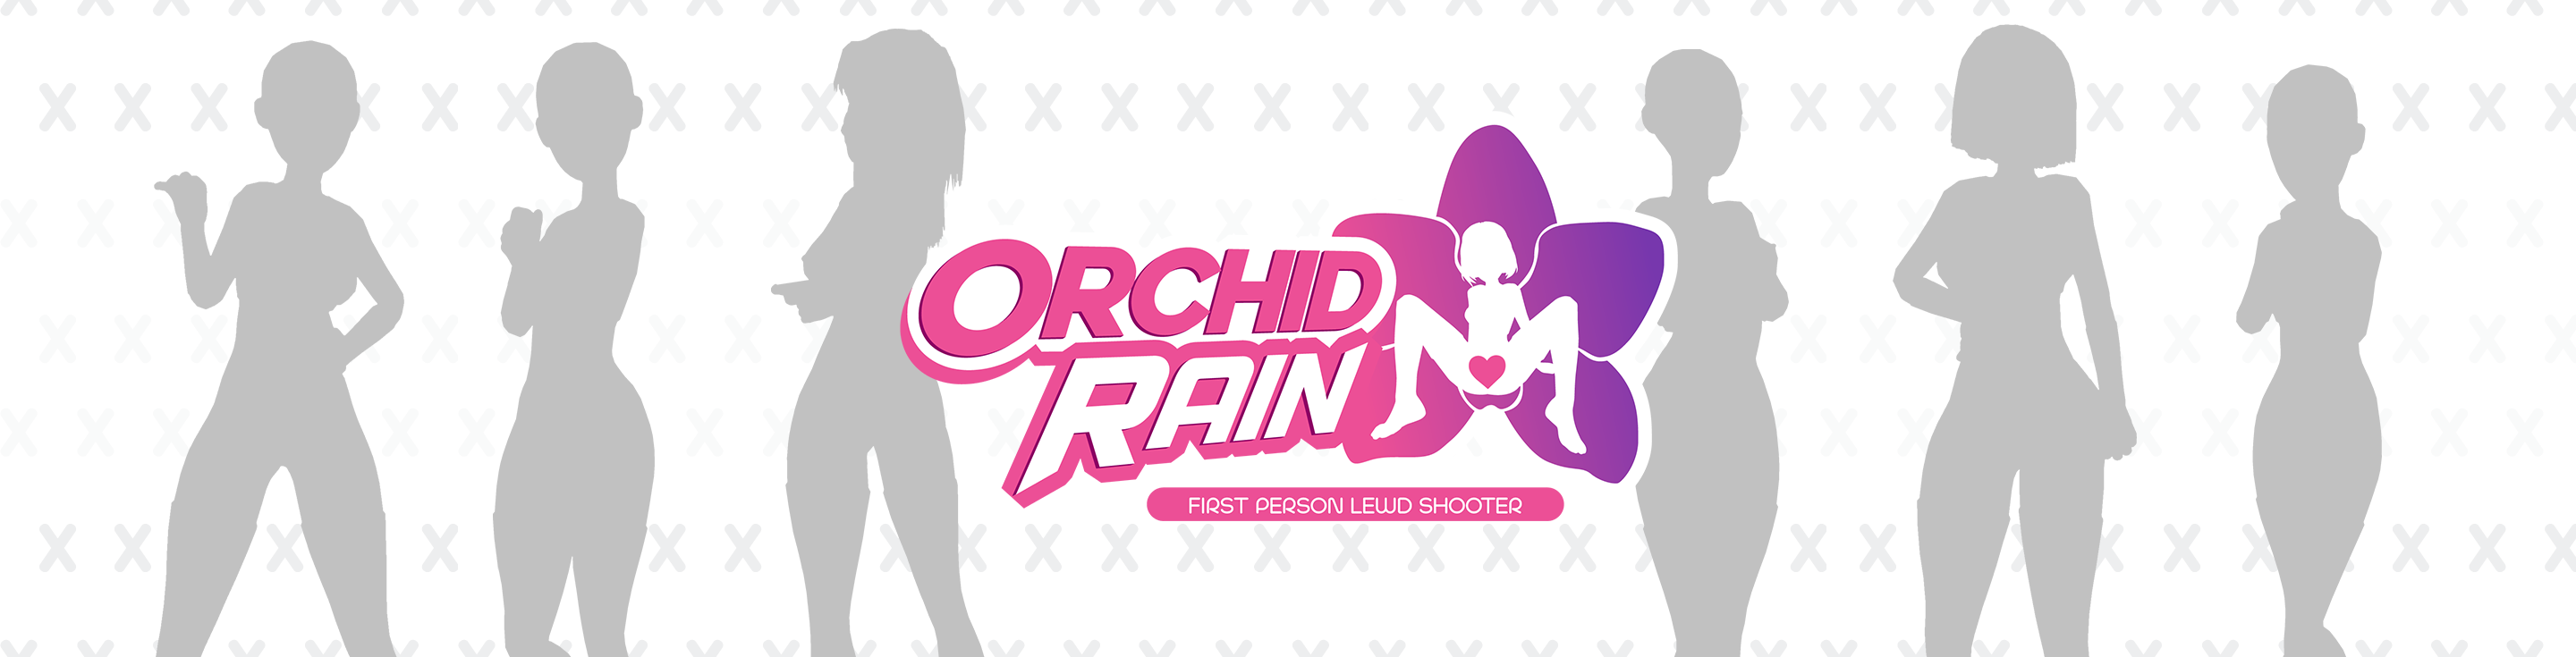 Orchid Rain - Mission 05 build (outdated)